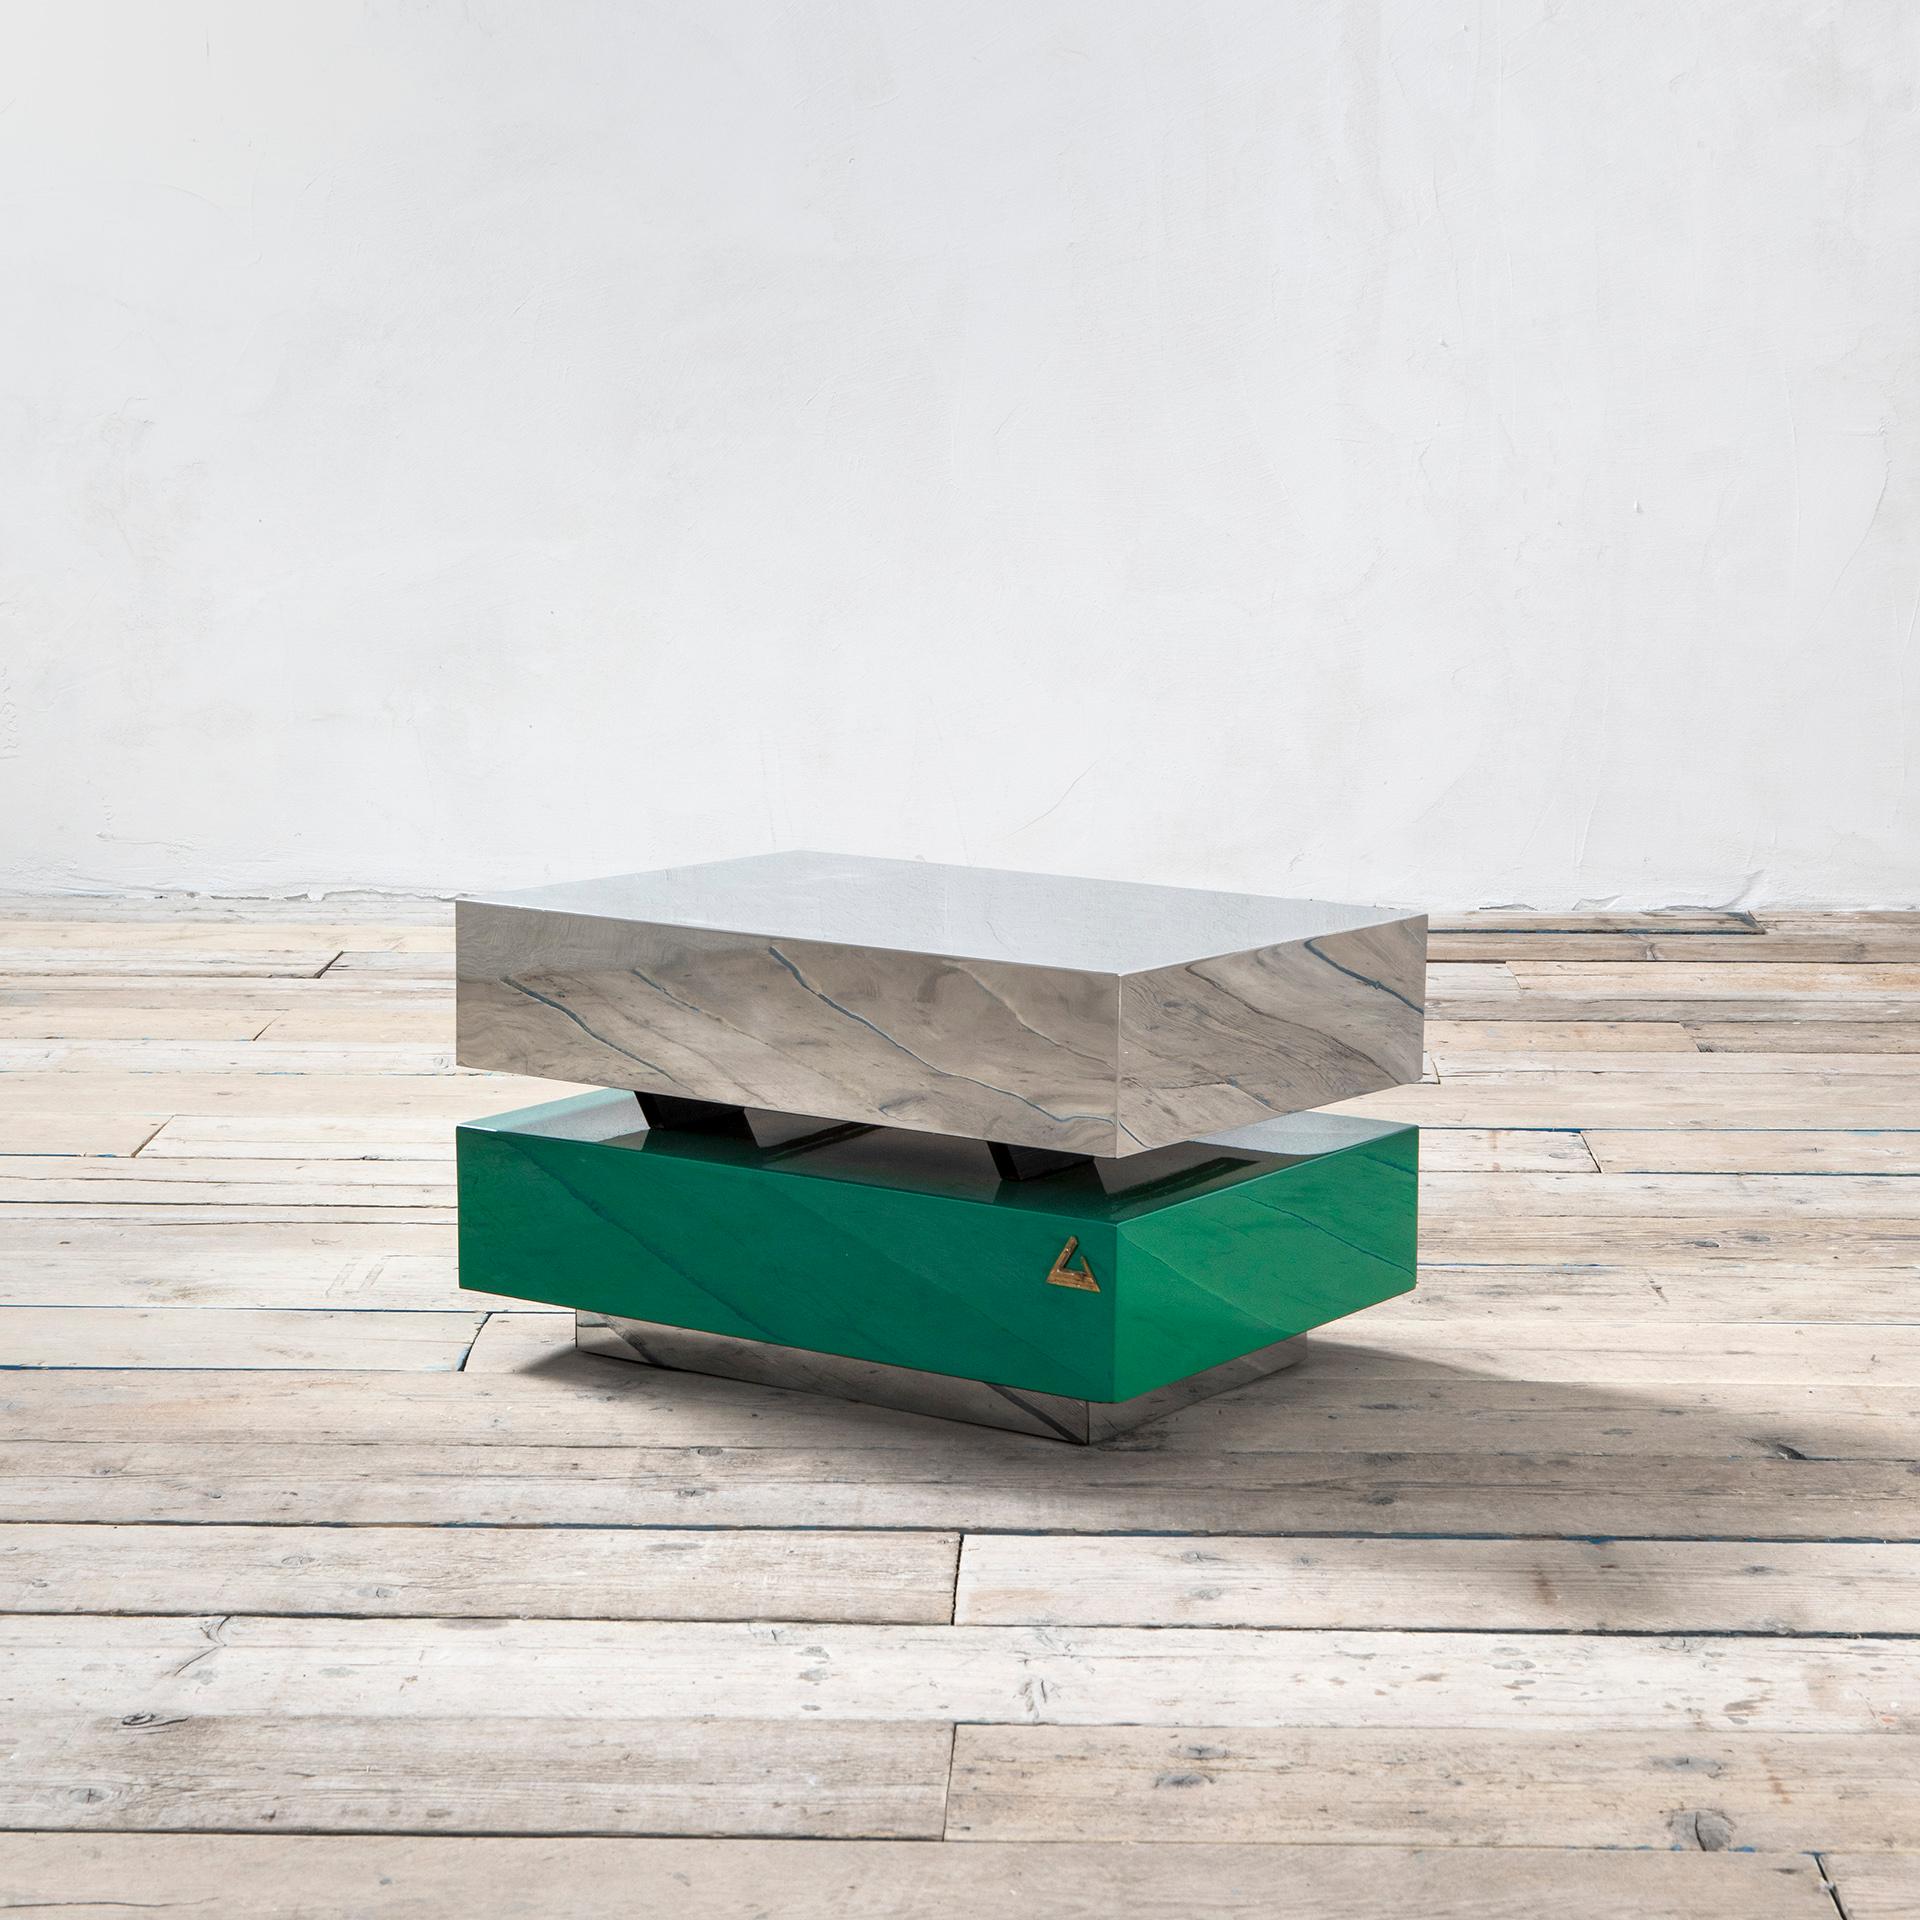 Very rare coffee or centre table designed by the artist Gabriella Crespi for the series Plurimi. The table was designed in '70 and this example was produced in '80s, rare version in lacquered wood and steel. Colored in green and silver. Thet table